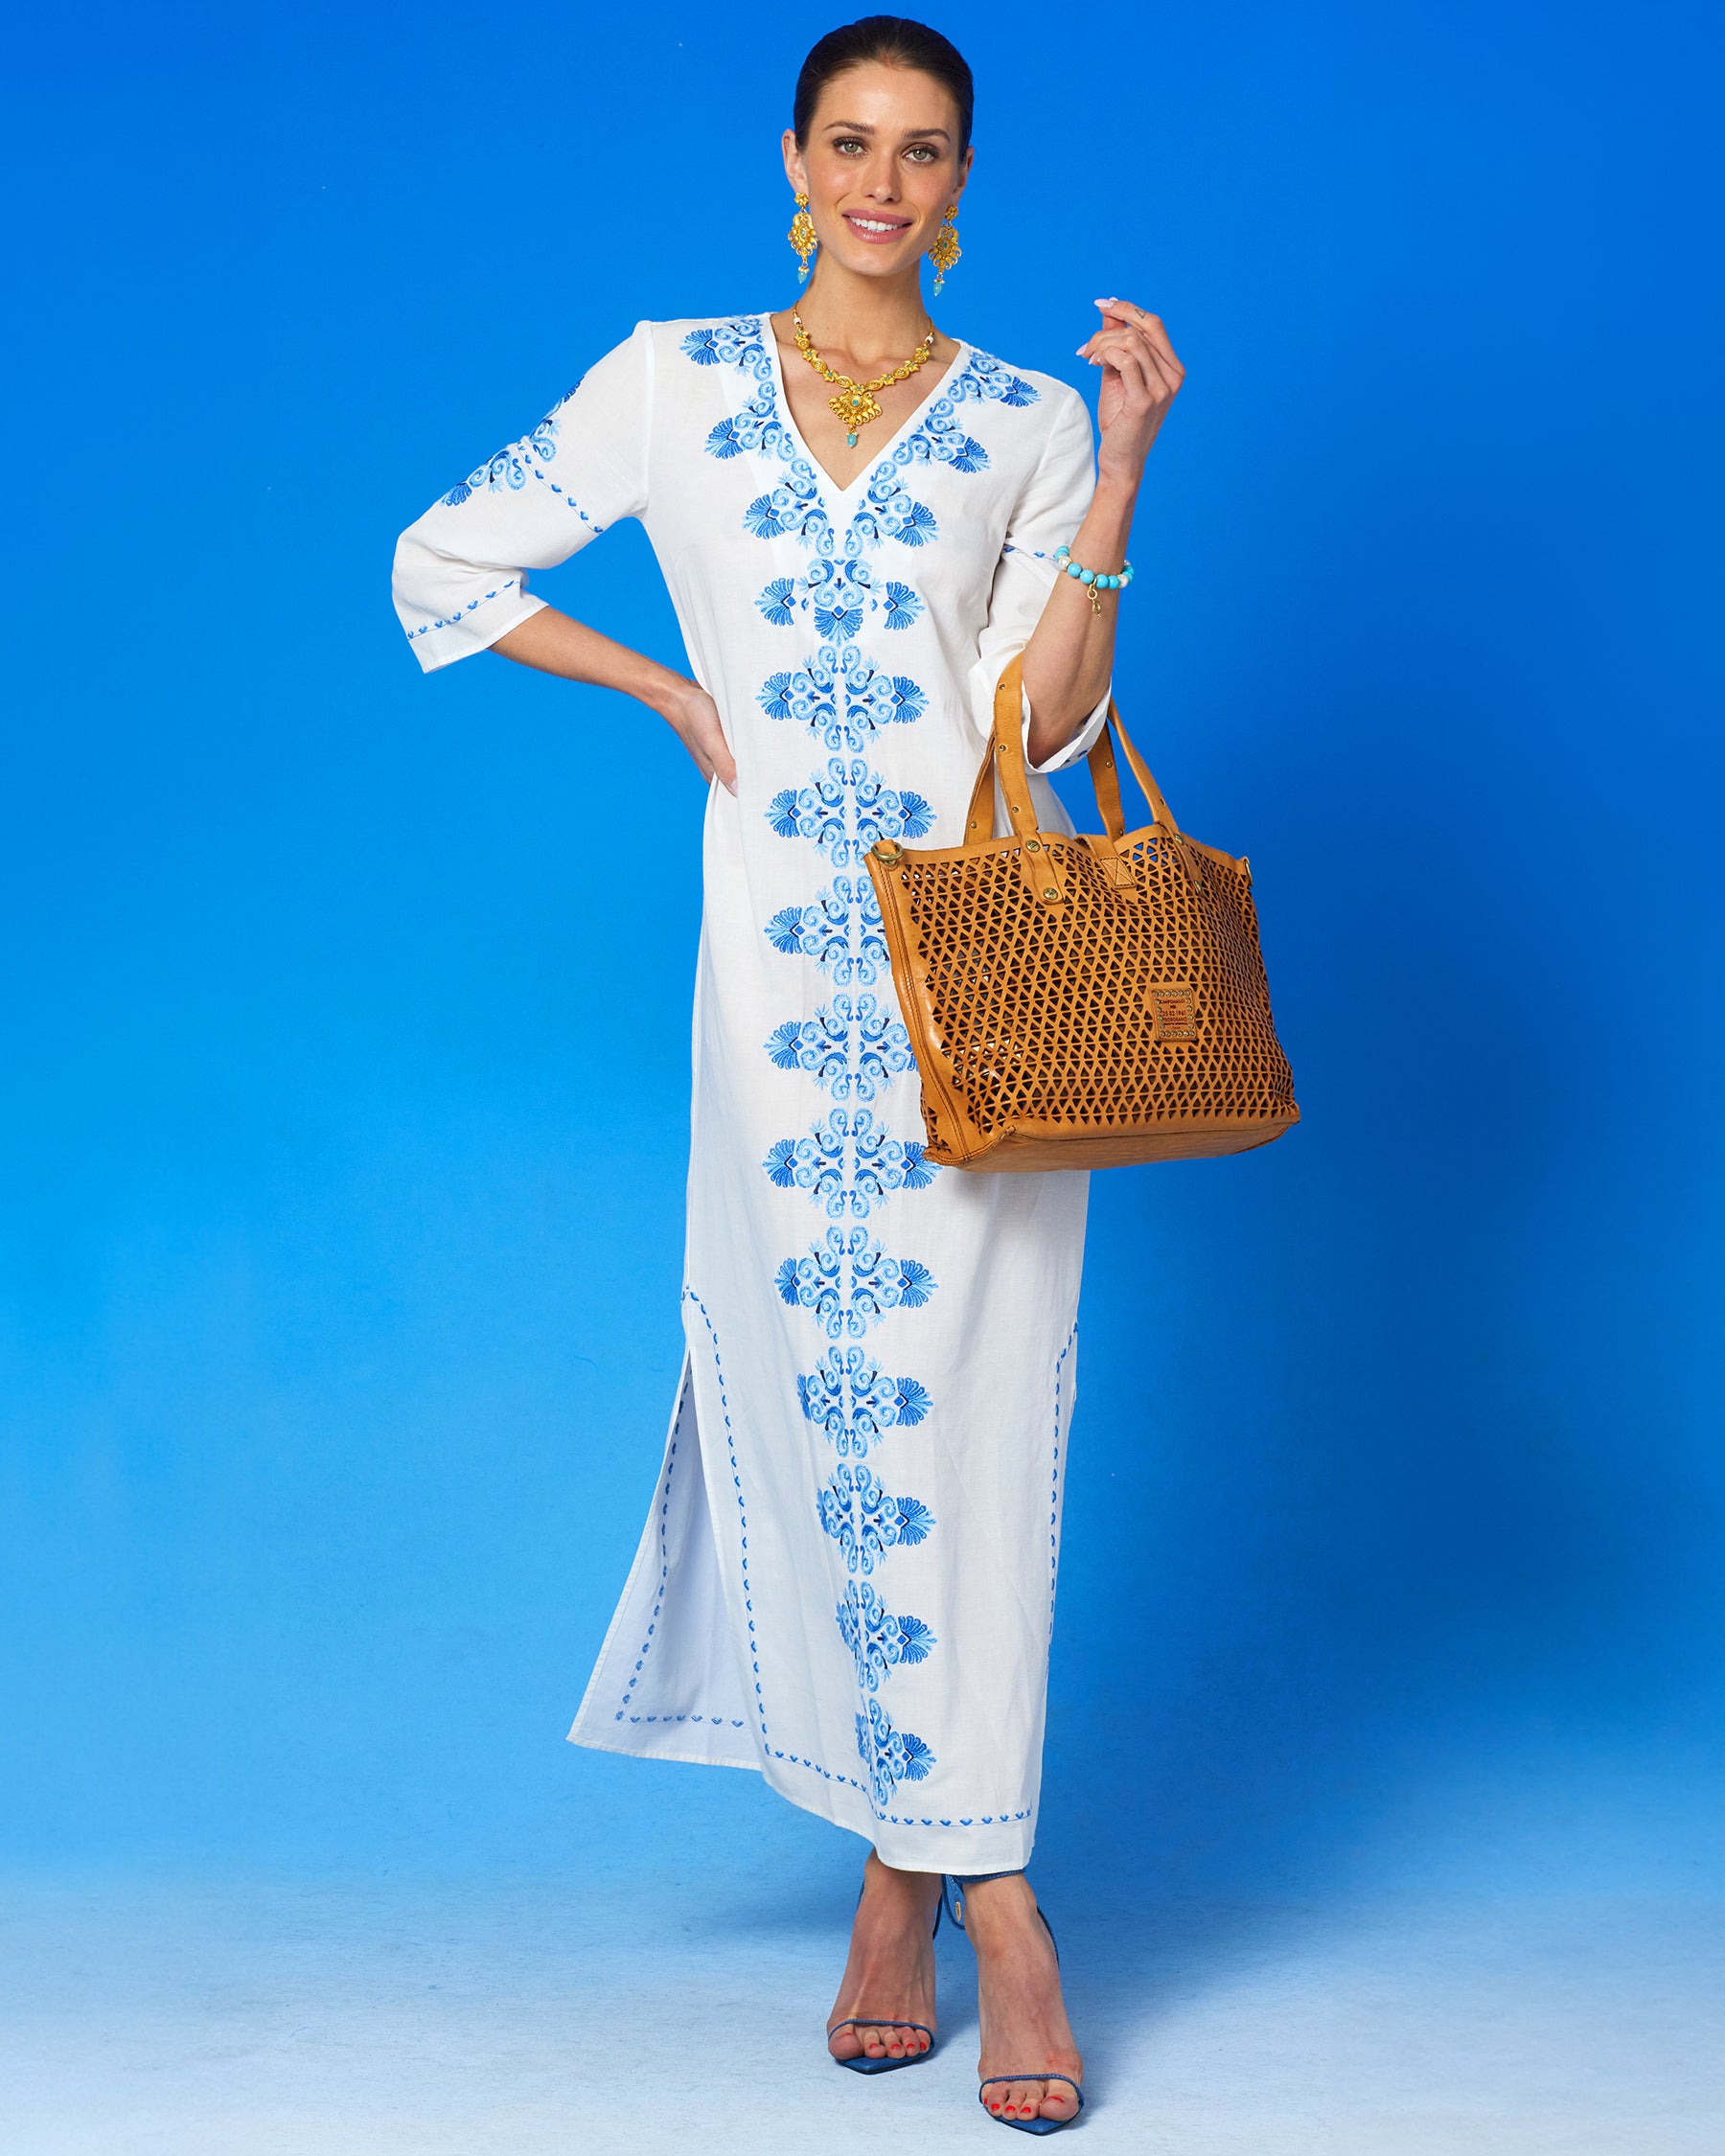 Menorca Long Kaftan Dress and Grecian Motif Embroidery-Front view with Campomaggi Leather Tote